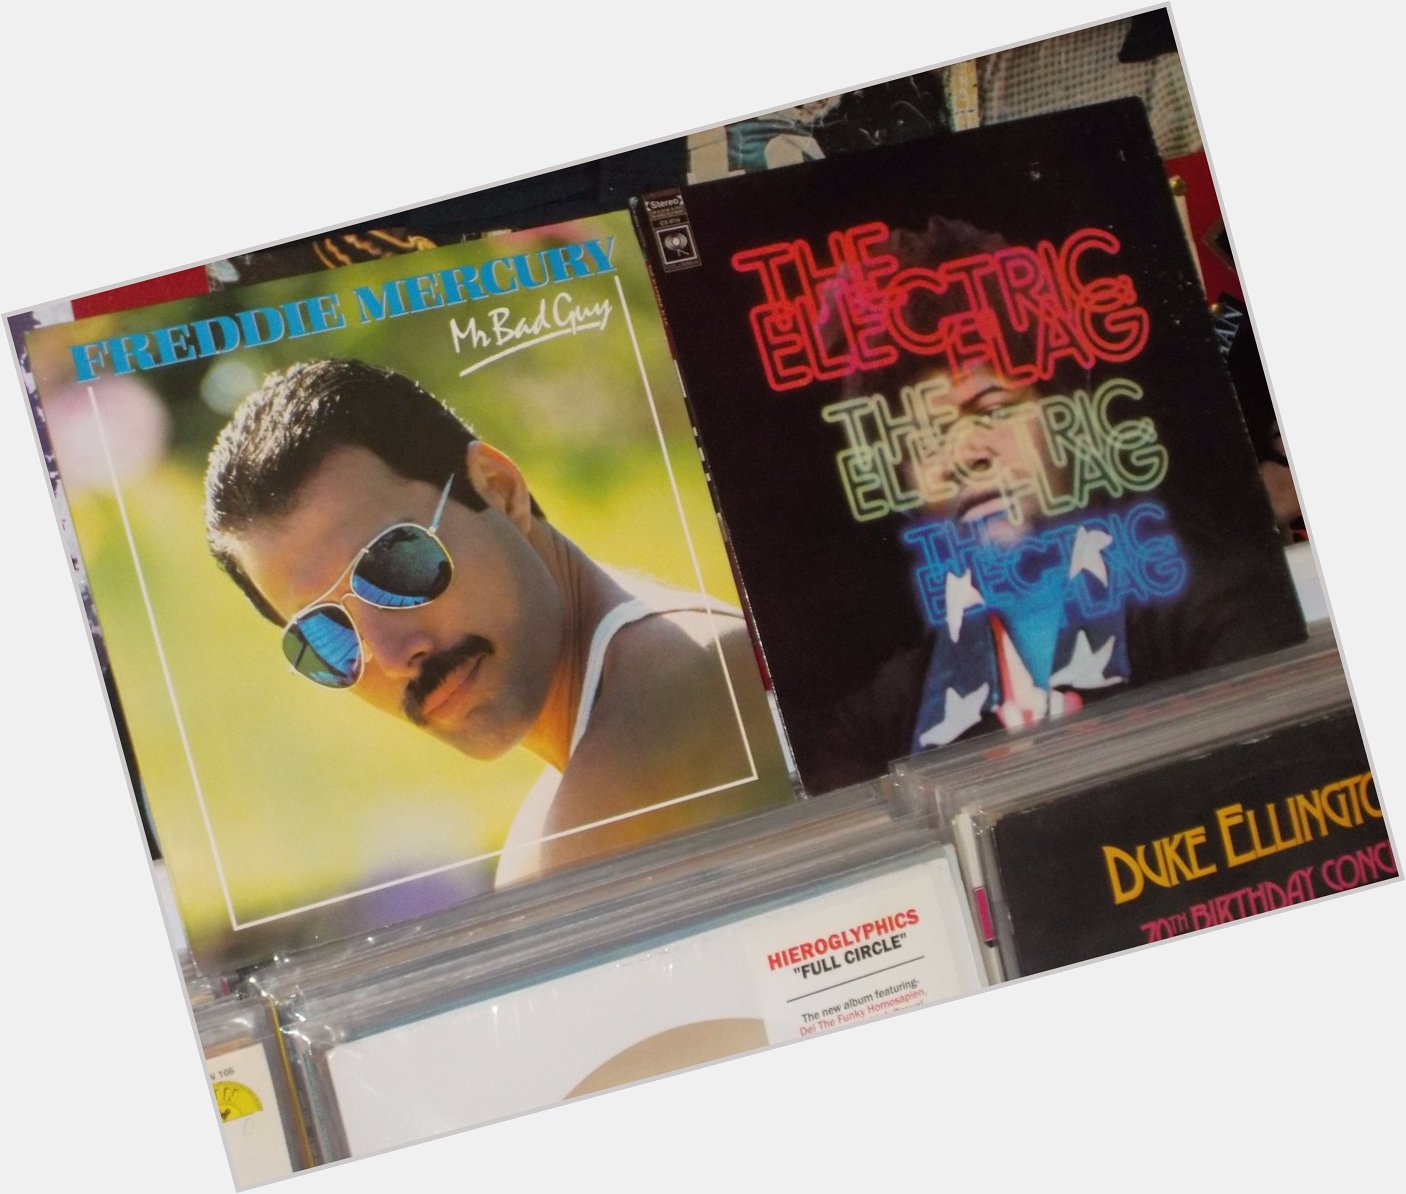 Happy Birthday to the late Freddie Mercury (Queen) & the late Buddy Miles (Electric Flag & from Omaha) 